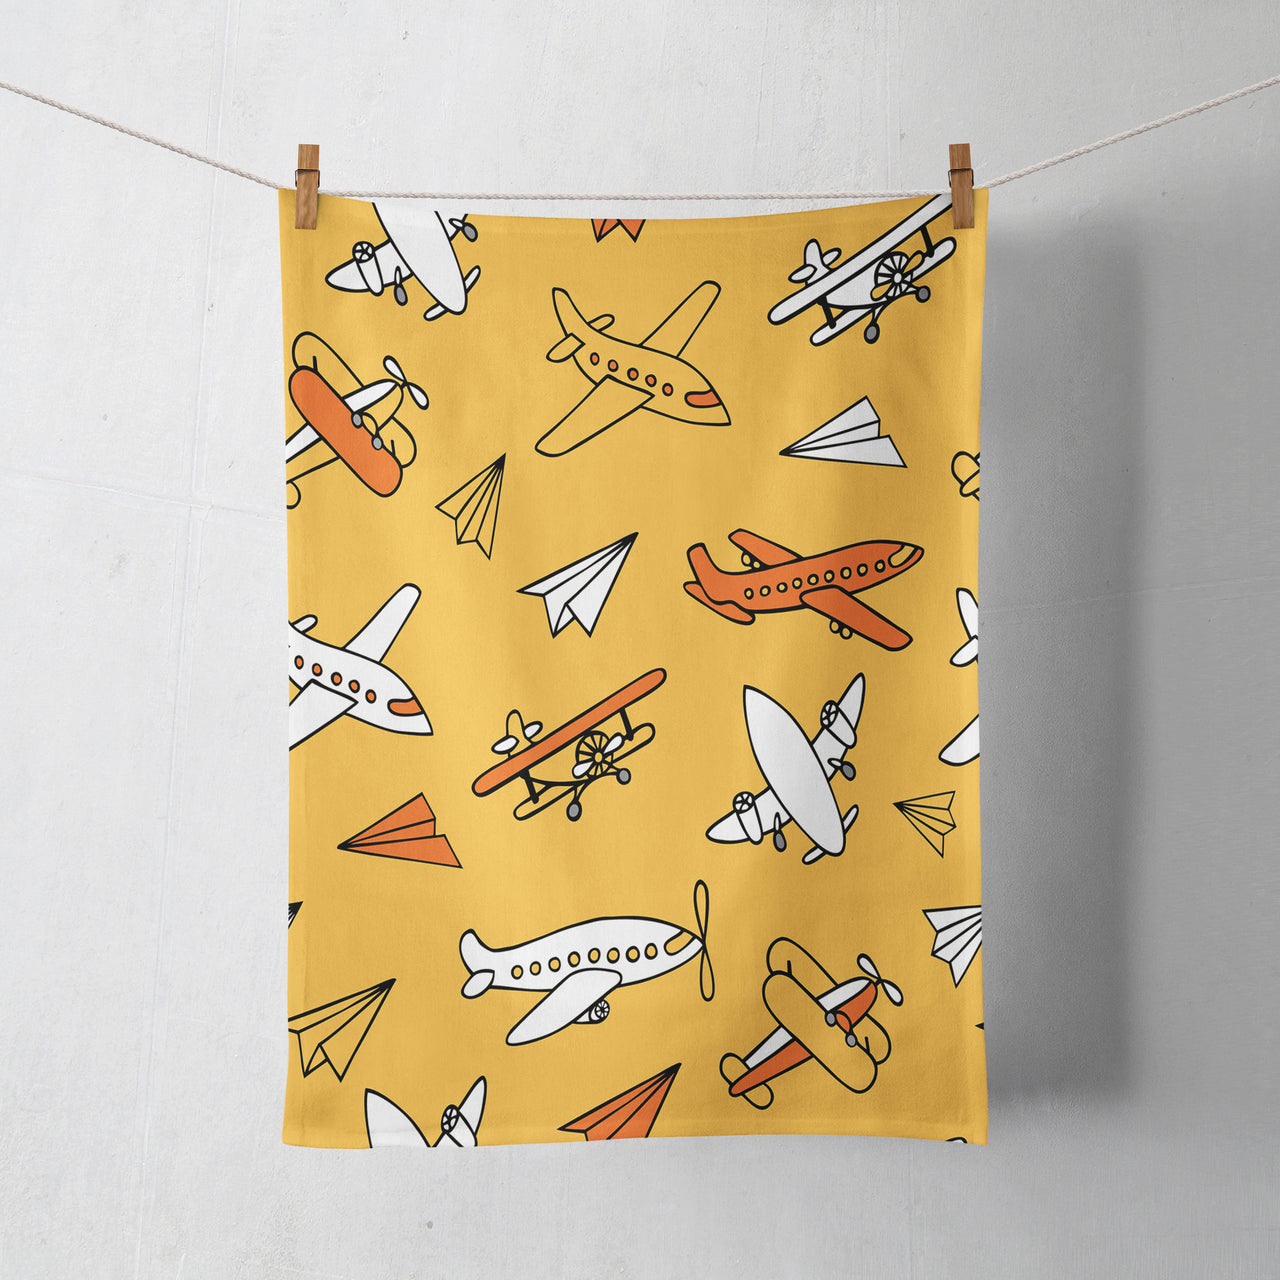 Super Drawings of Airplanes Designed Towels